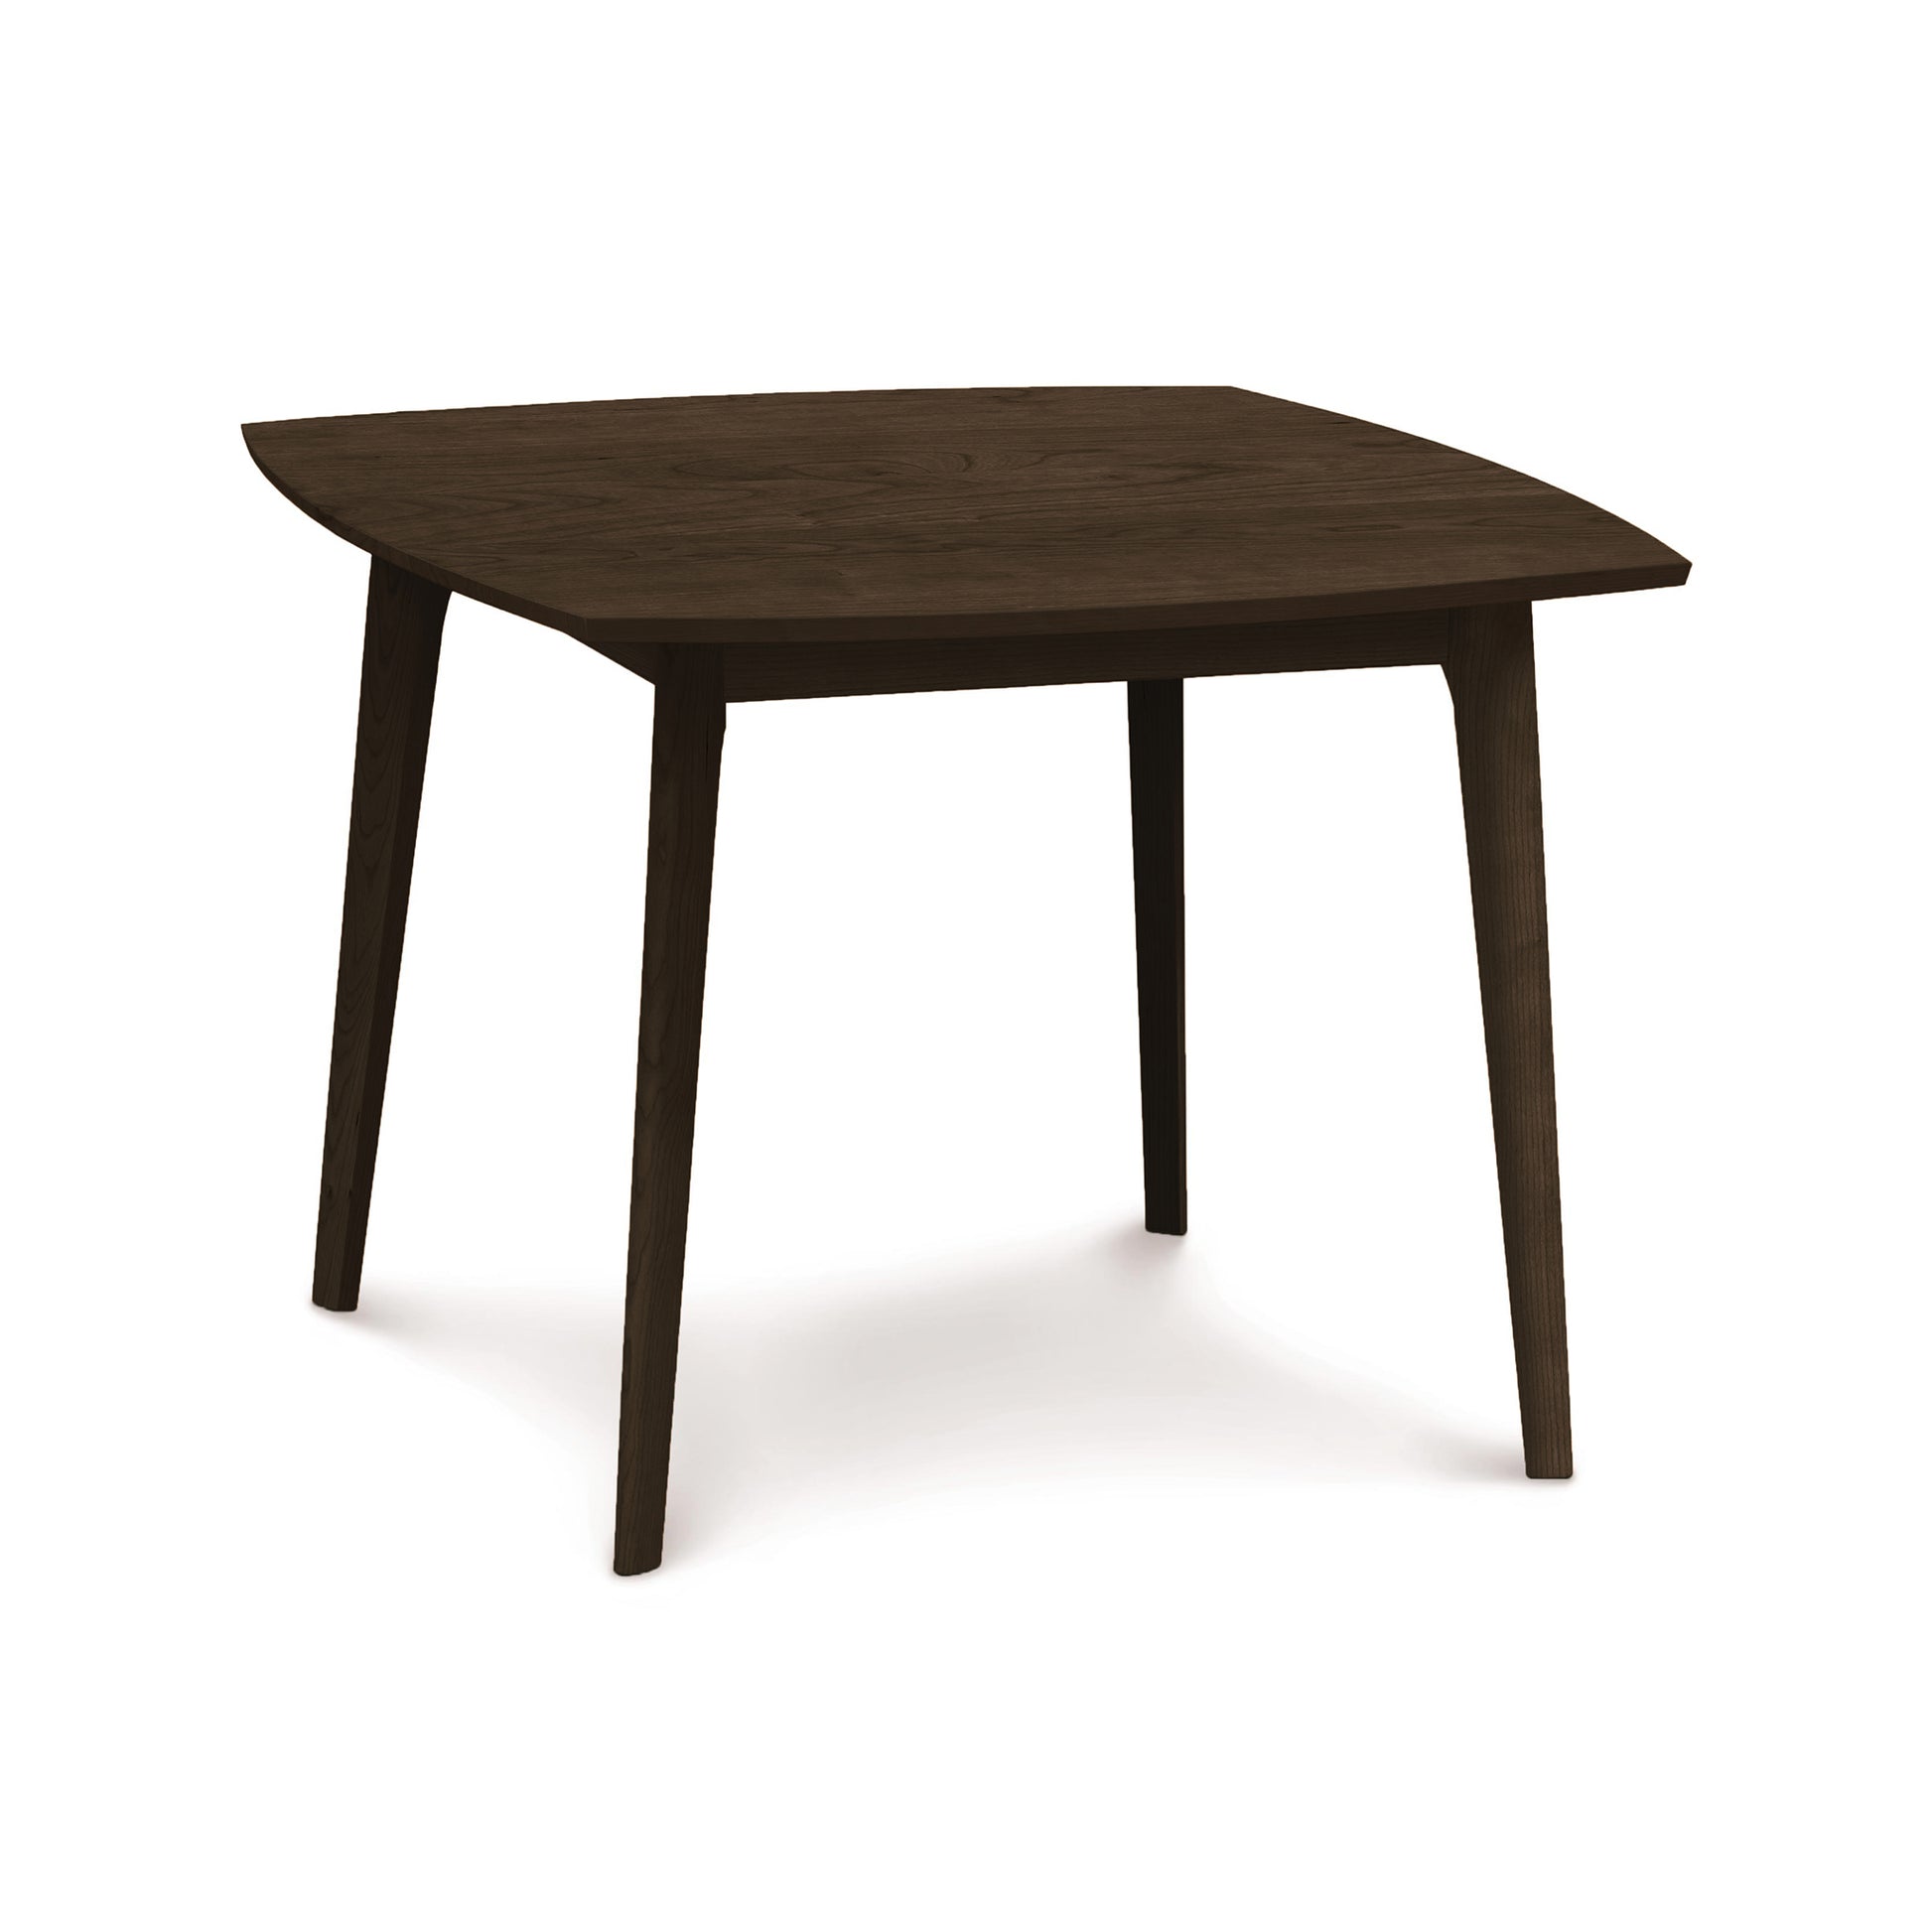 A solid wood Copeland Furniture Catalina Solid-Top Table with an asymmetrical hexagonal top and four legs against a white background, crafted from sustainably-sourced hardwoods.